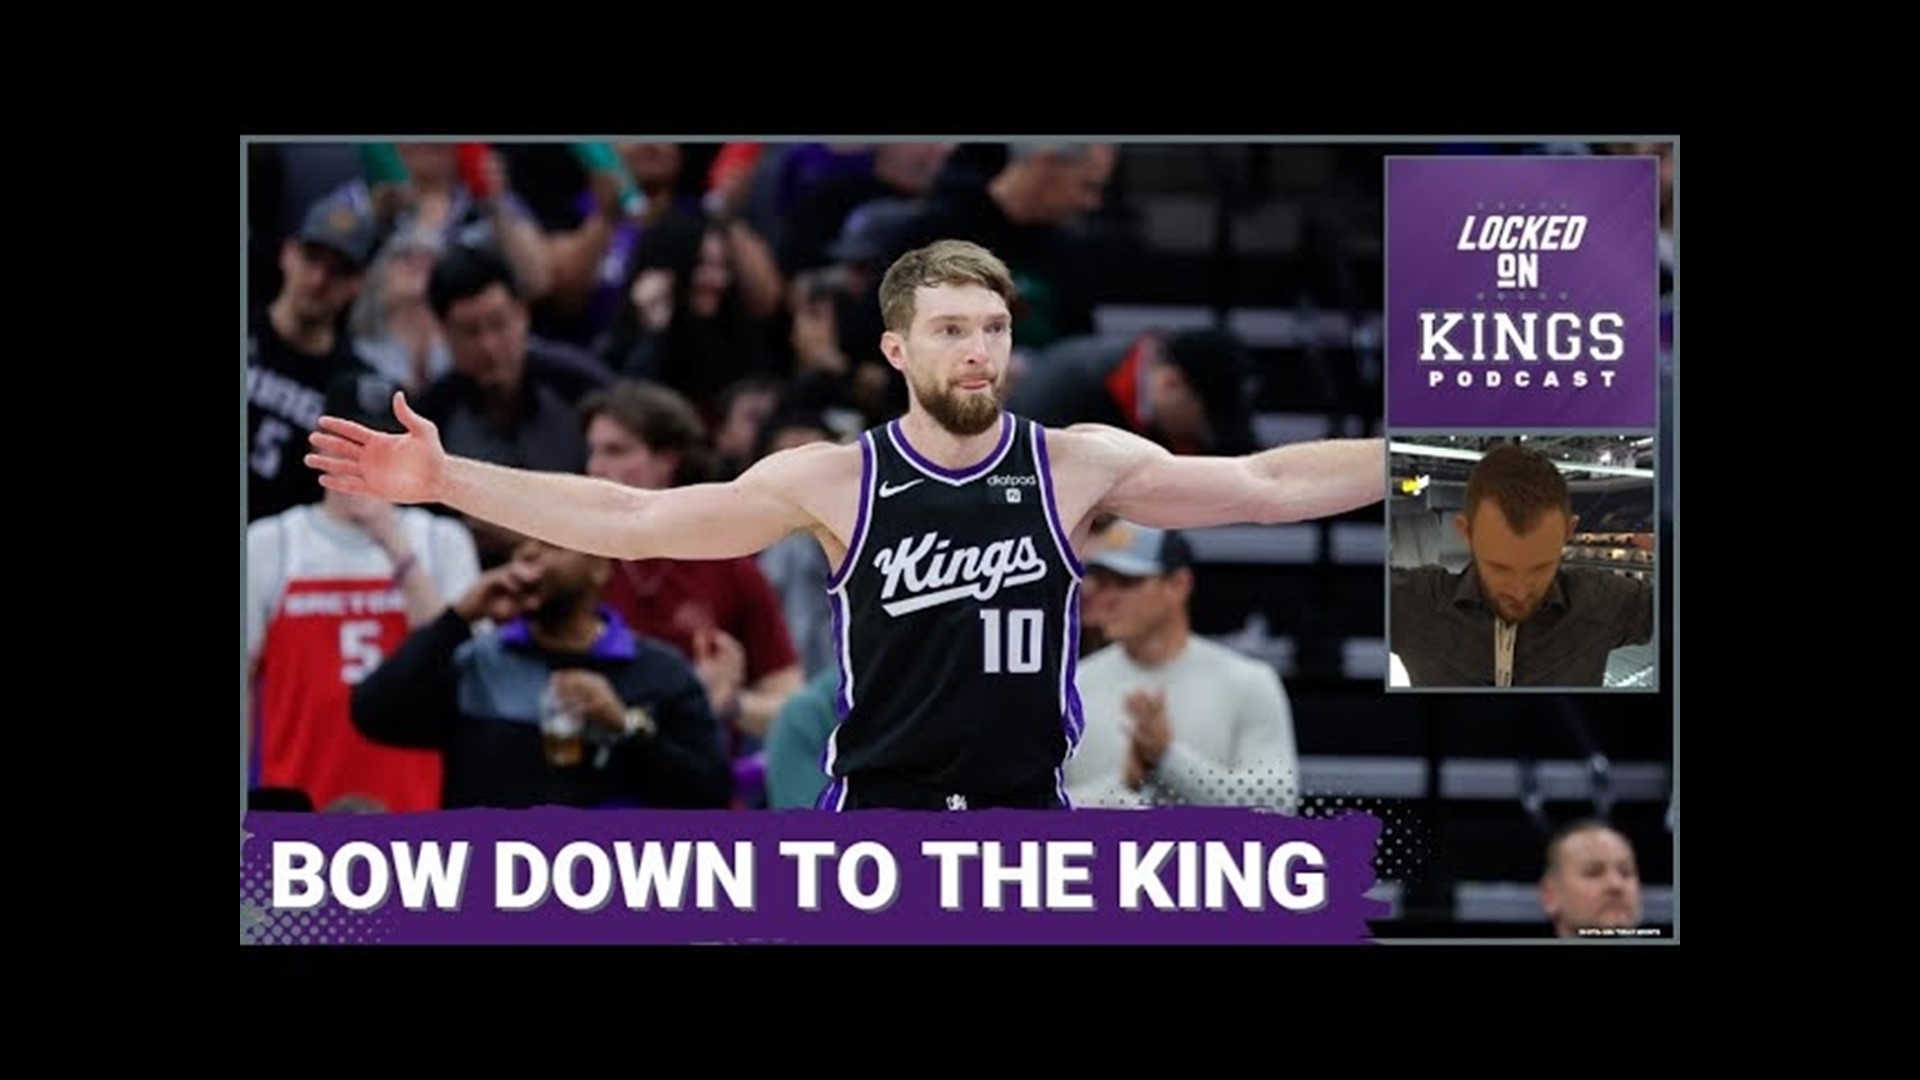 Matt George reacts to Domantas Sabonis' record 54th straight double-double and 25th triple-double of the season, while the Sacramento Kings defense shines again.